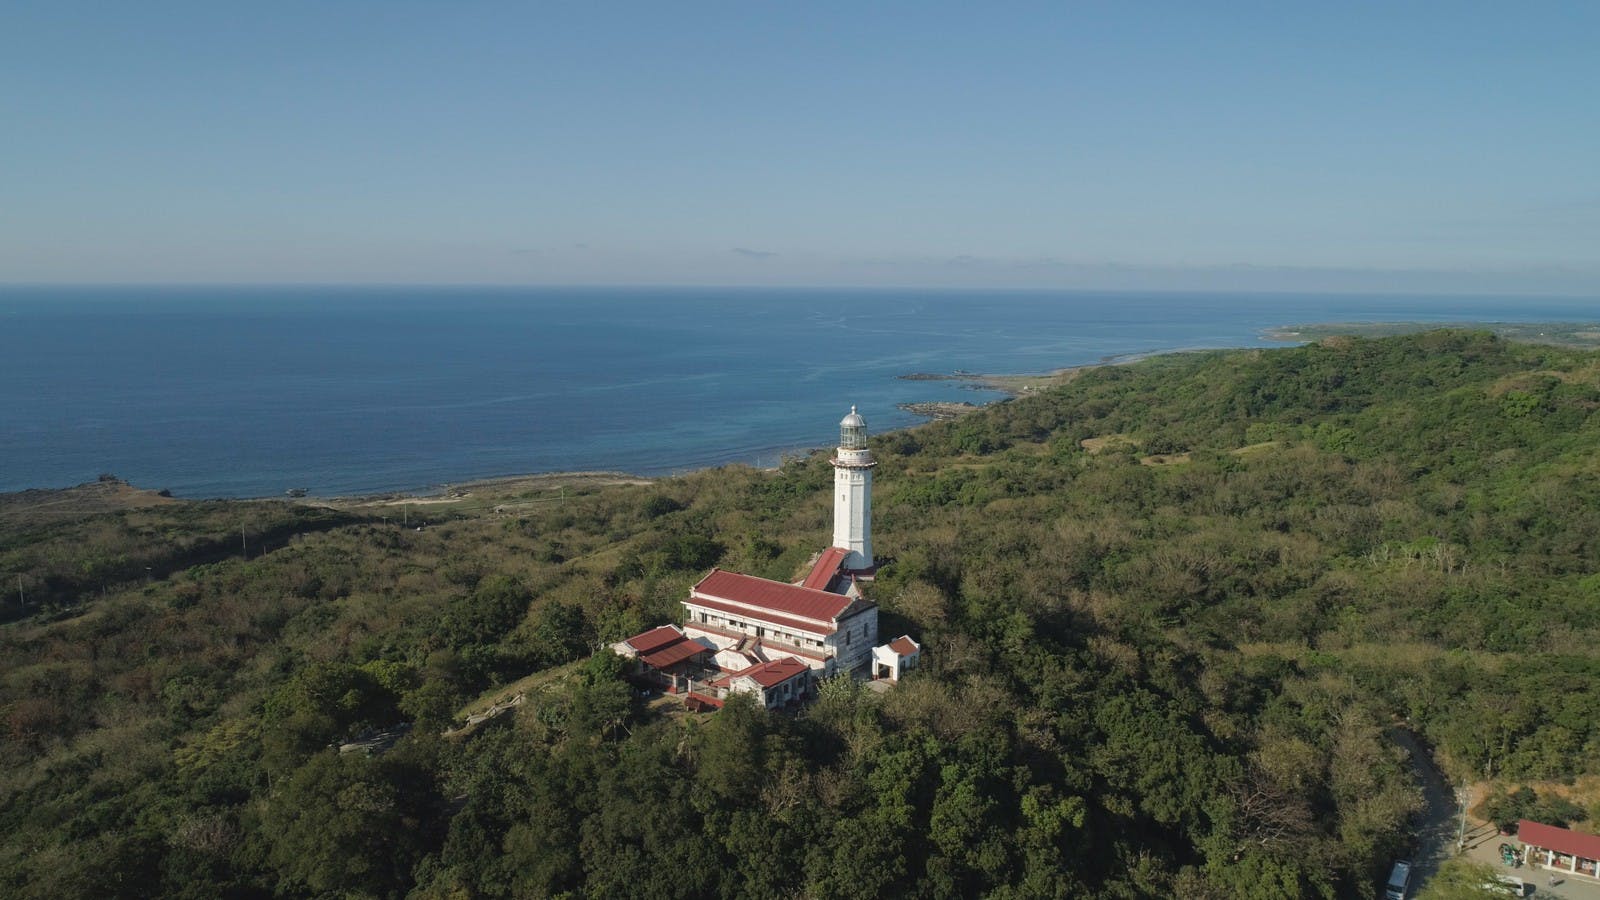 Cape Bojeador Lighthouse aerial view in Laoag